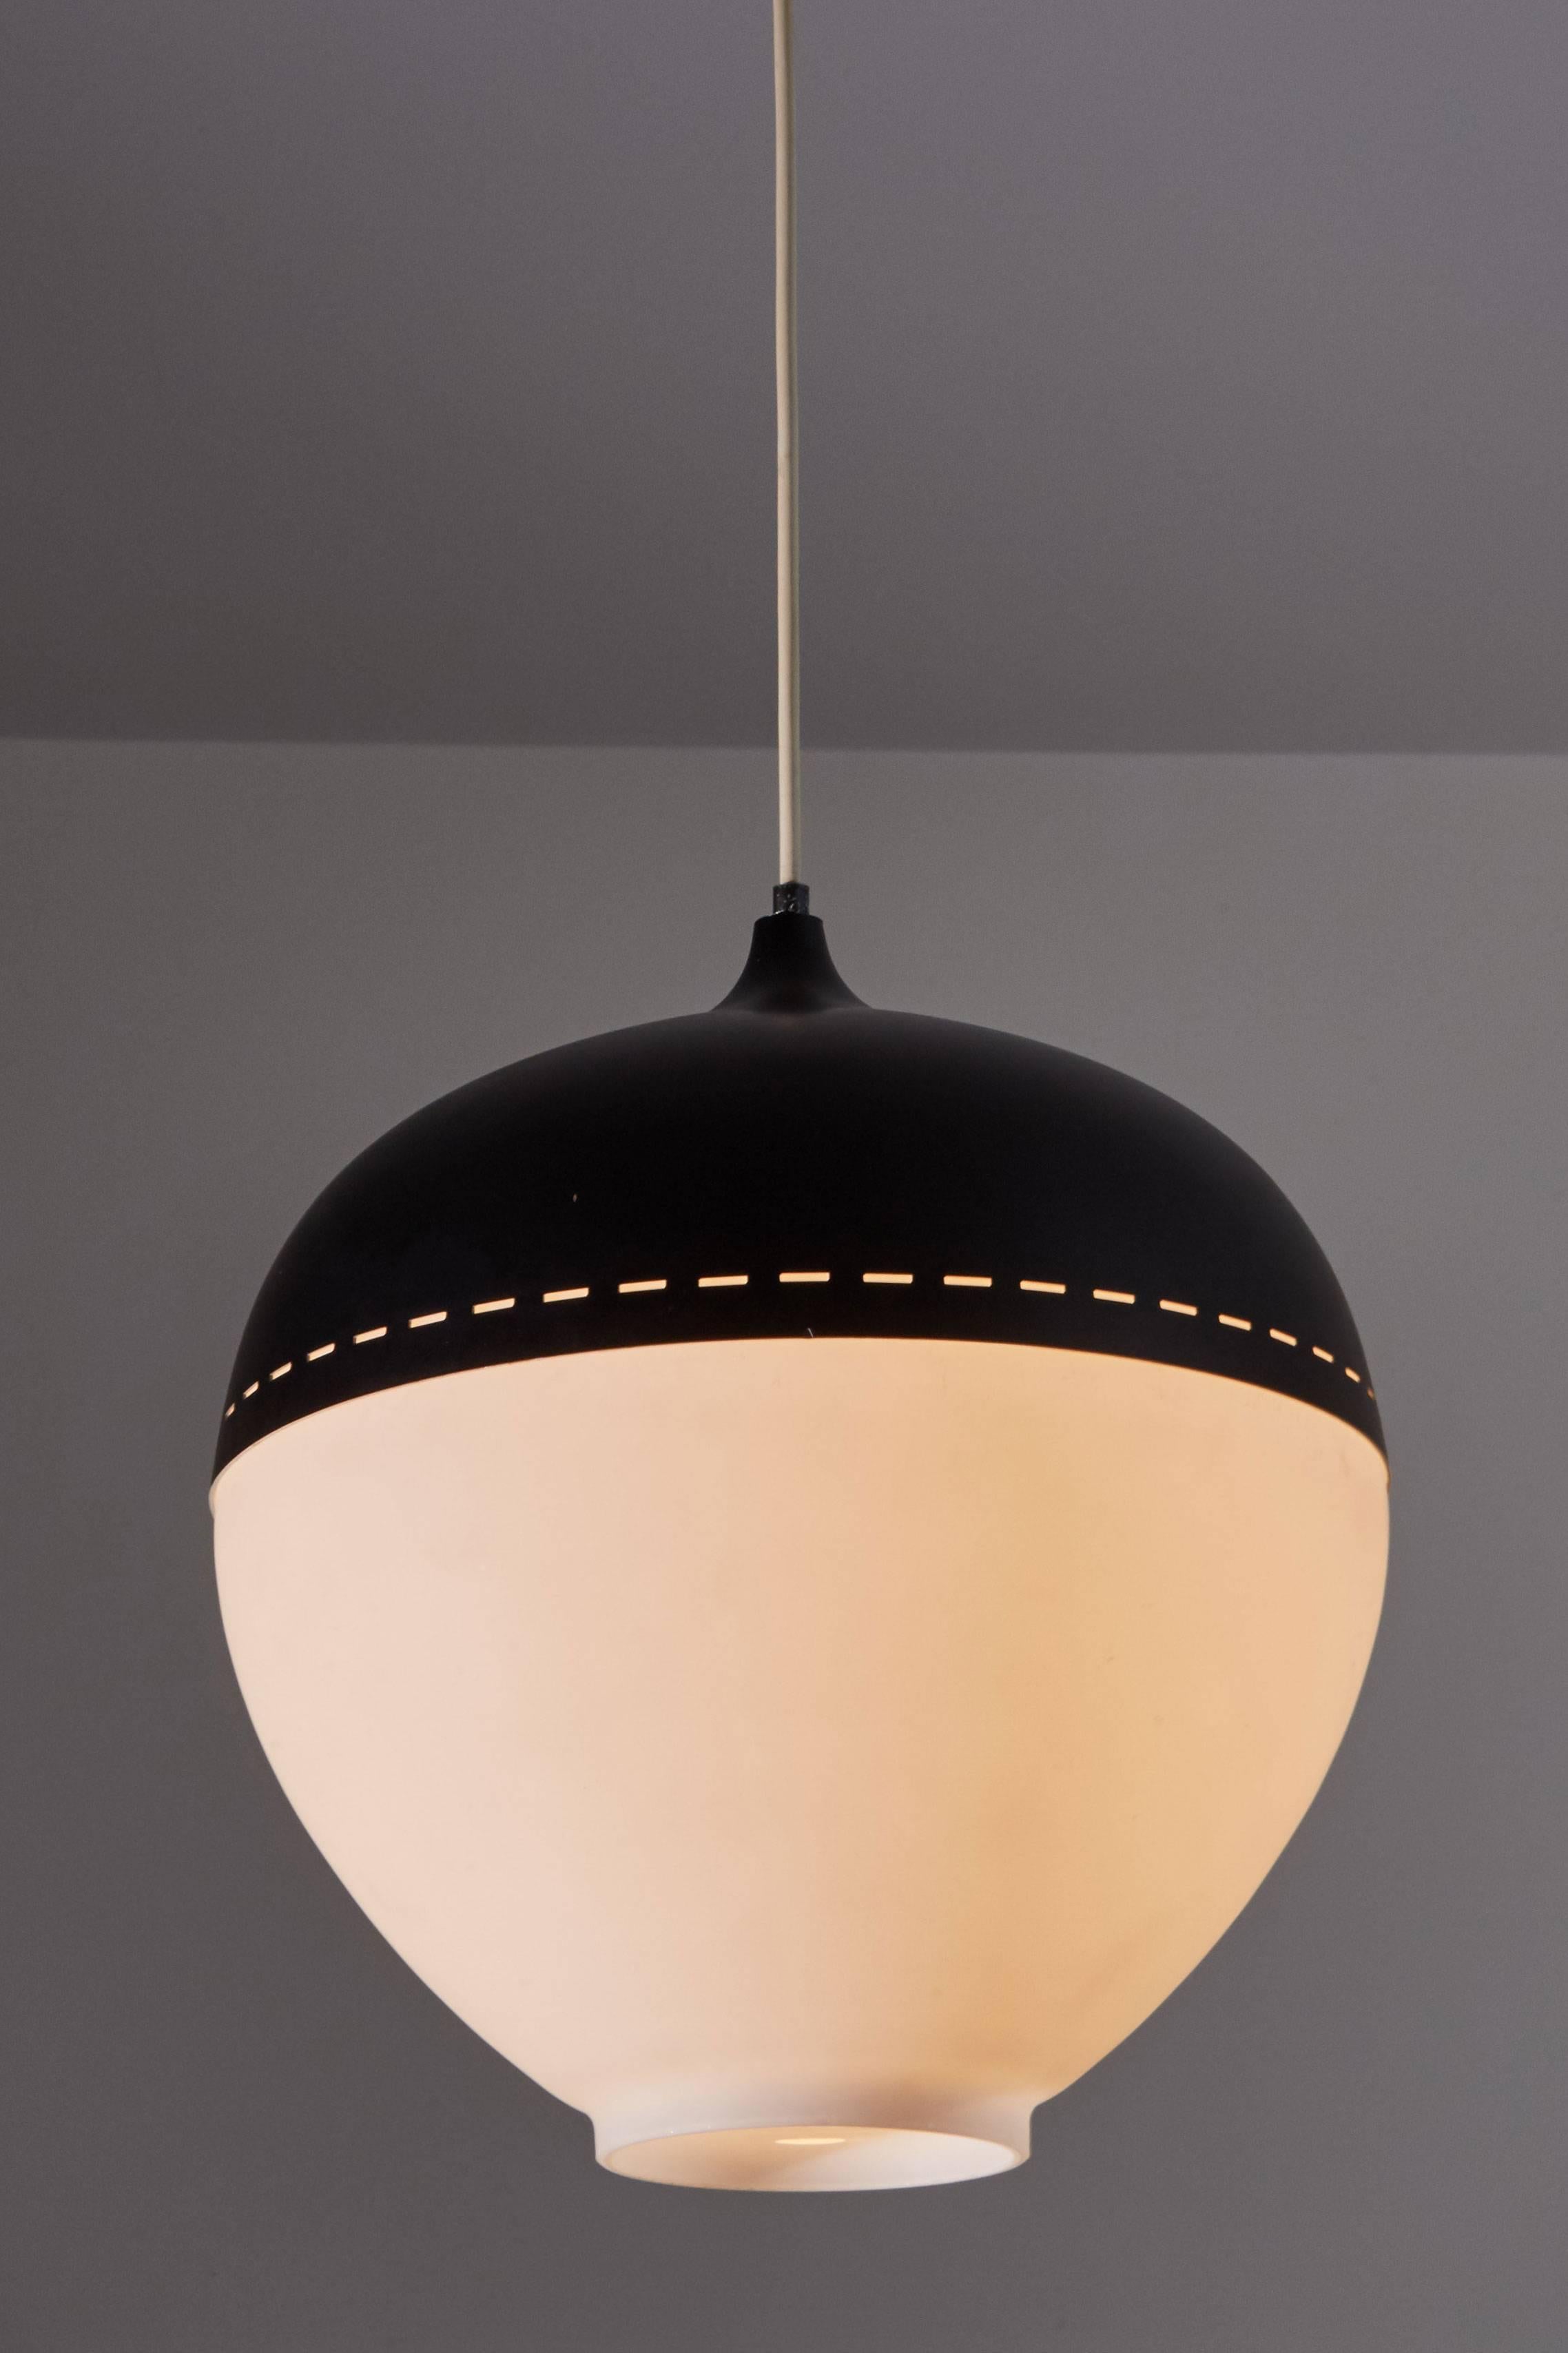 Satin glass and perforated metal pendant by Stilnovo designed in Italy, circa 1950s. Retains original label. Custom backplate. Wired for US junction boxes. Takes one E27 100w maximum bulb.